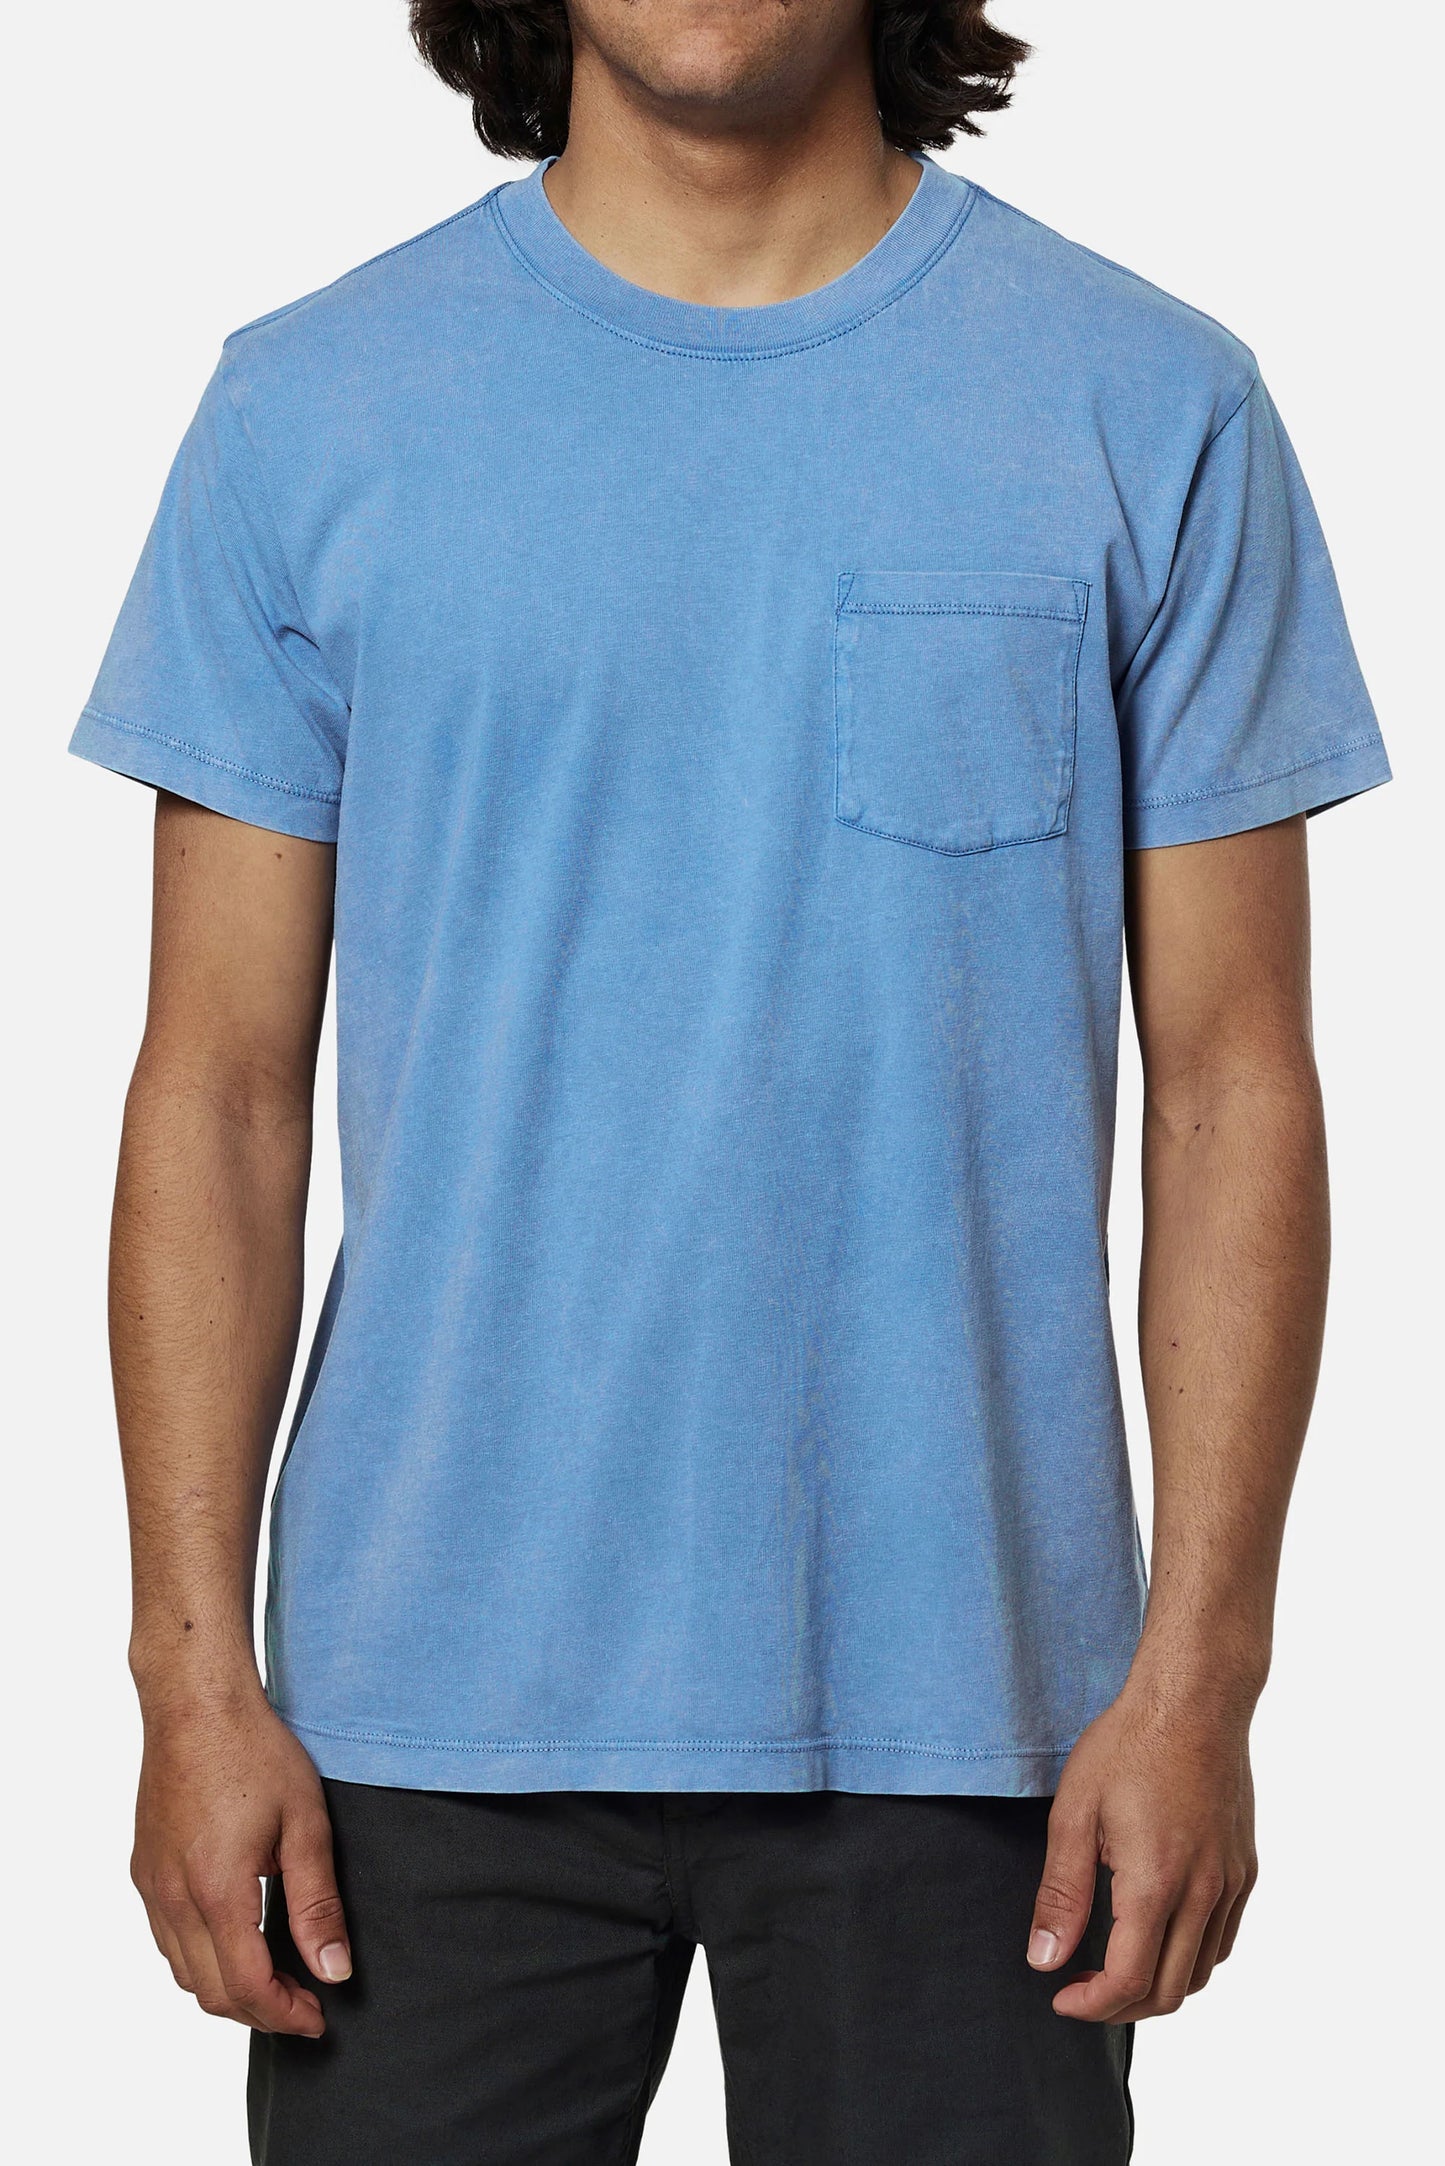 Front view of a man wearing a blue short sleeve pocket t-shirt by Katin